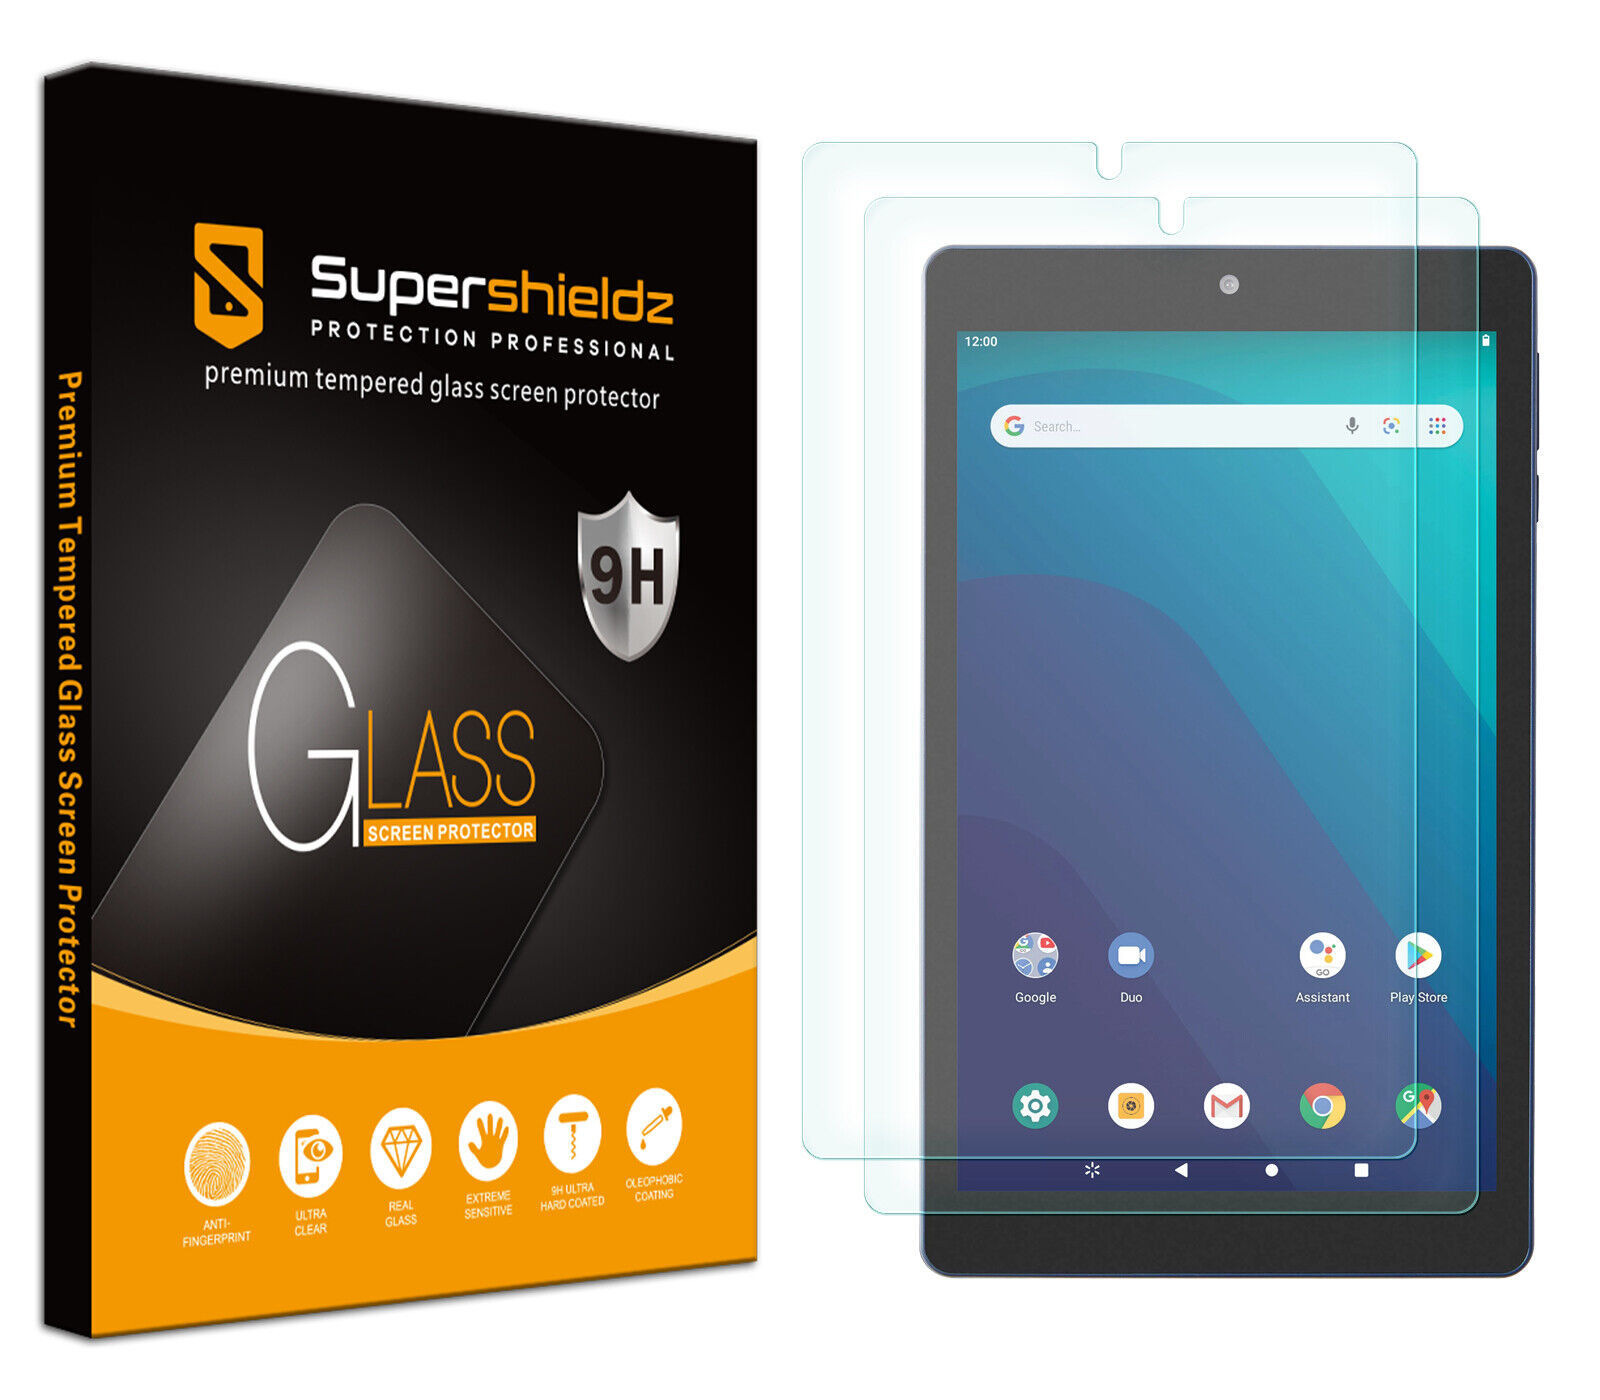 2X Supershieldz Tempered Glass Screen Protector for Onn 8" Tablet Gen 3 (2022) - $20.89